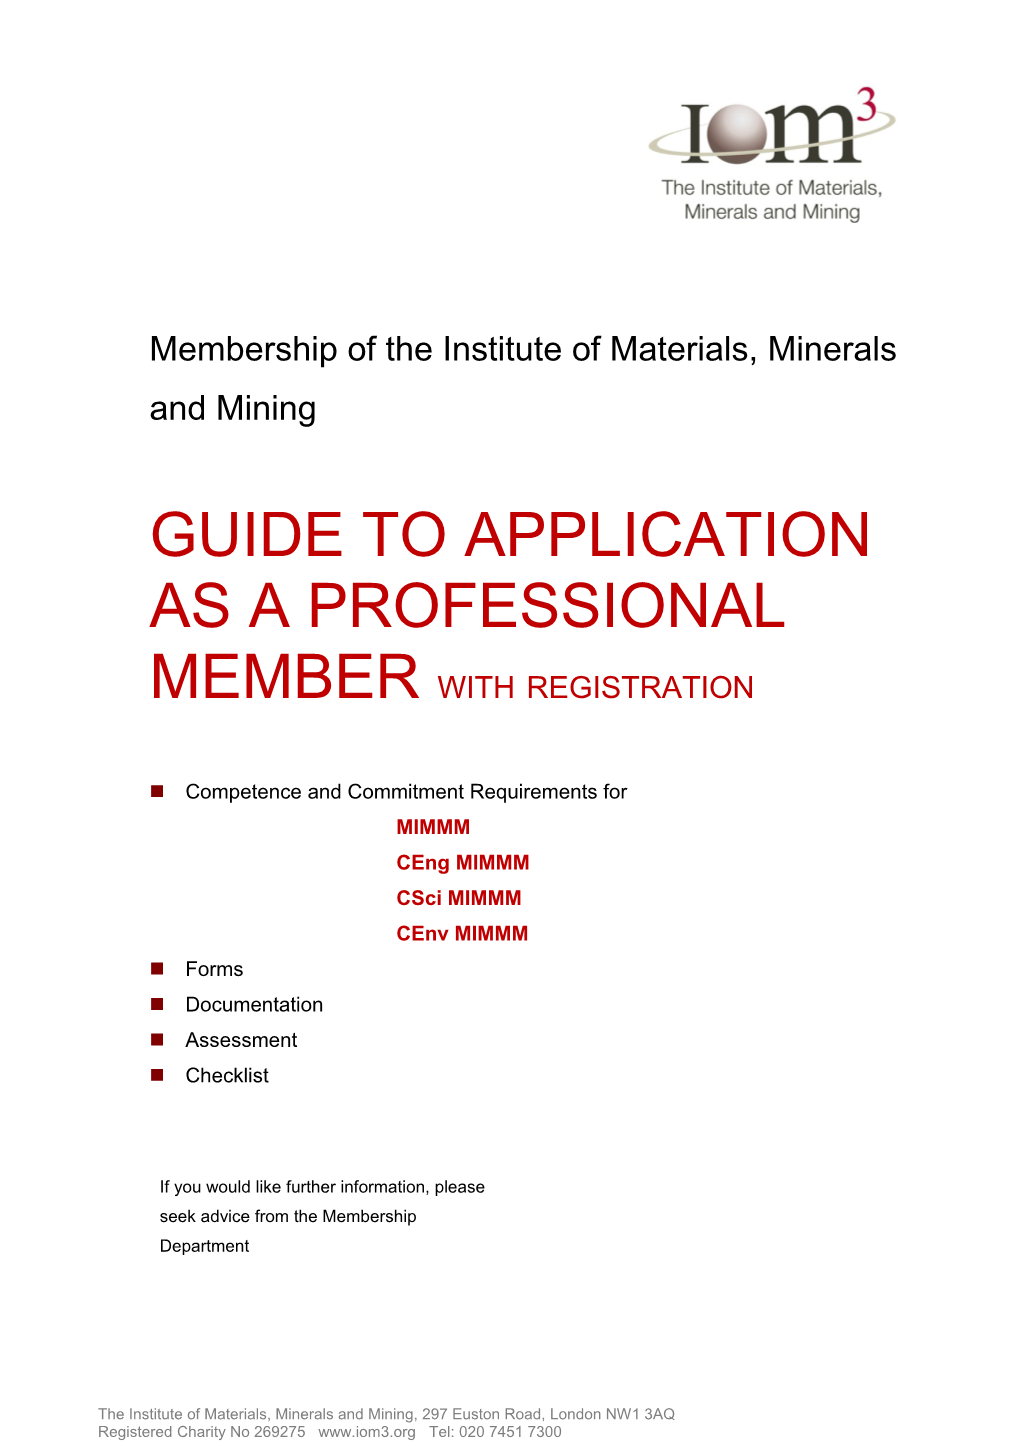 Guide to Application As a Professional Member